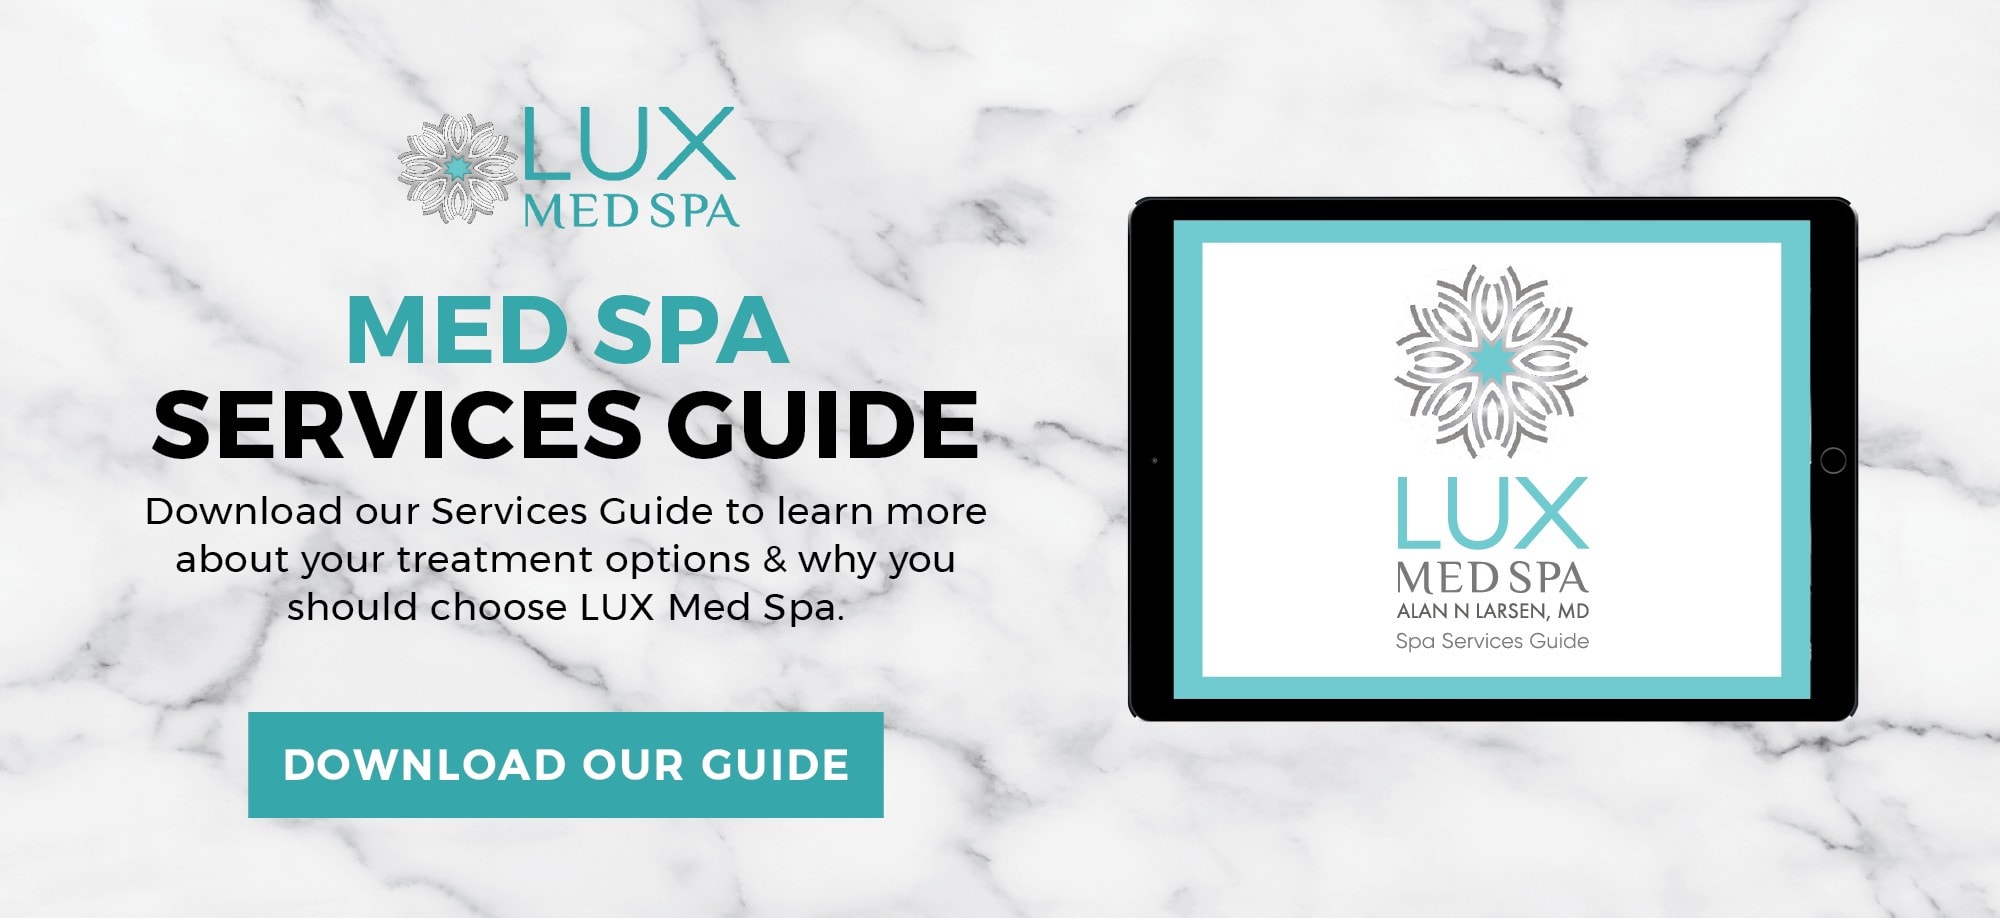 LUX Med Spa At Buckhead Plastic Surgery